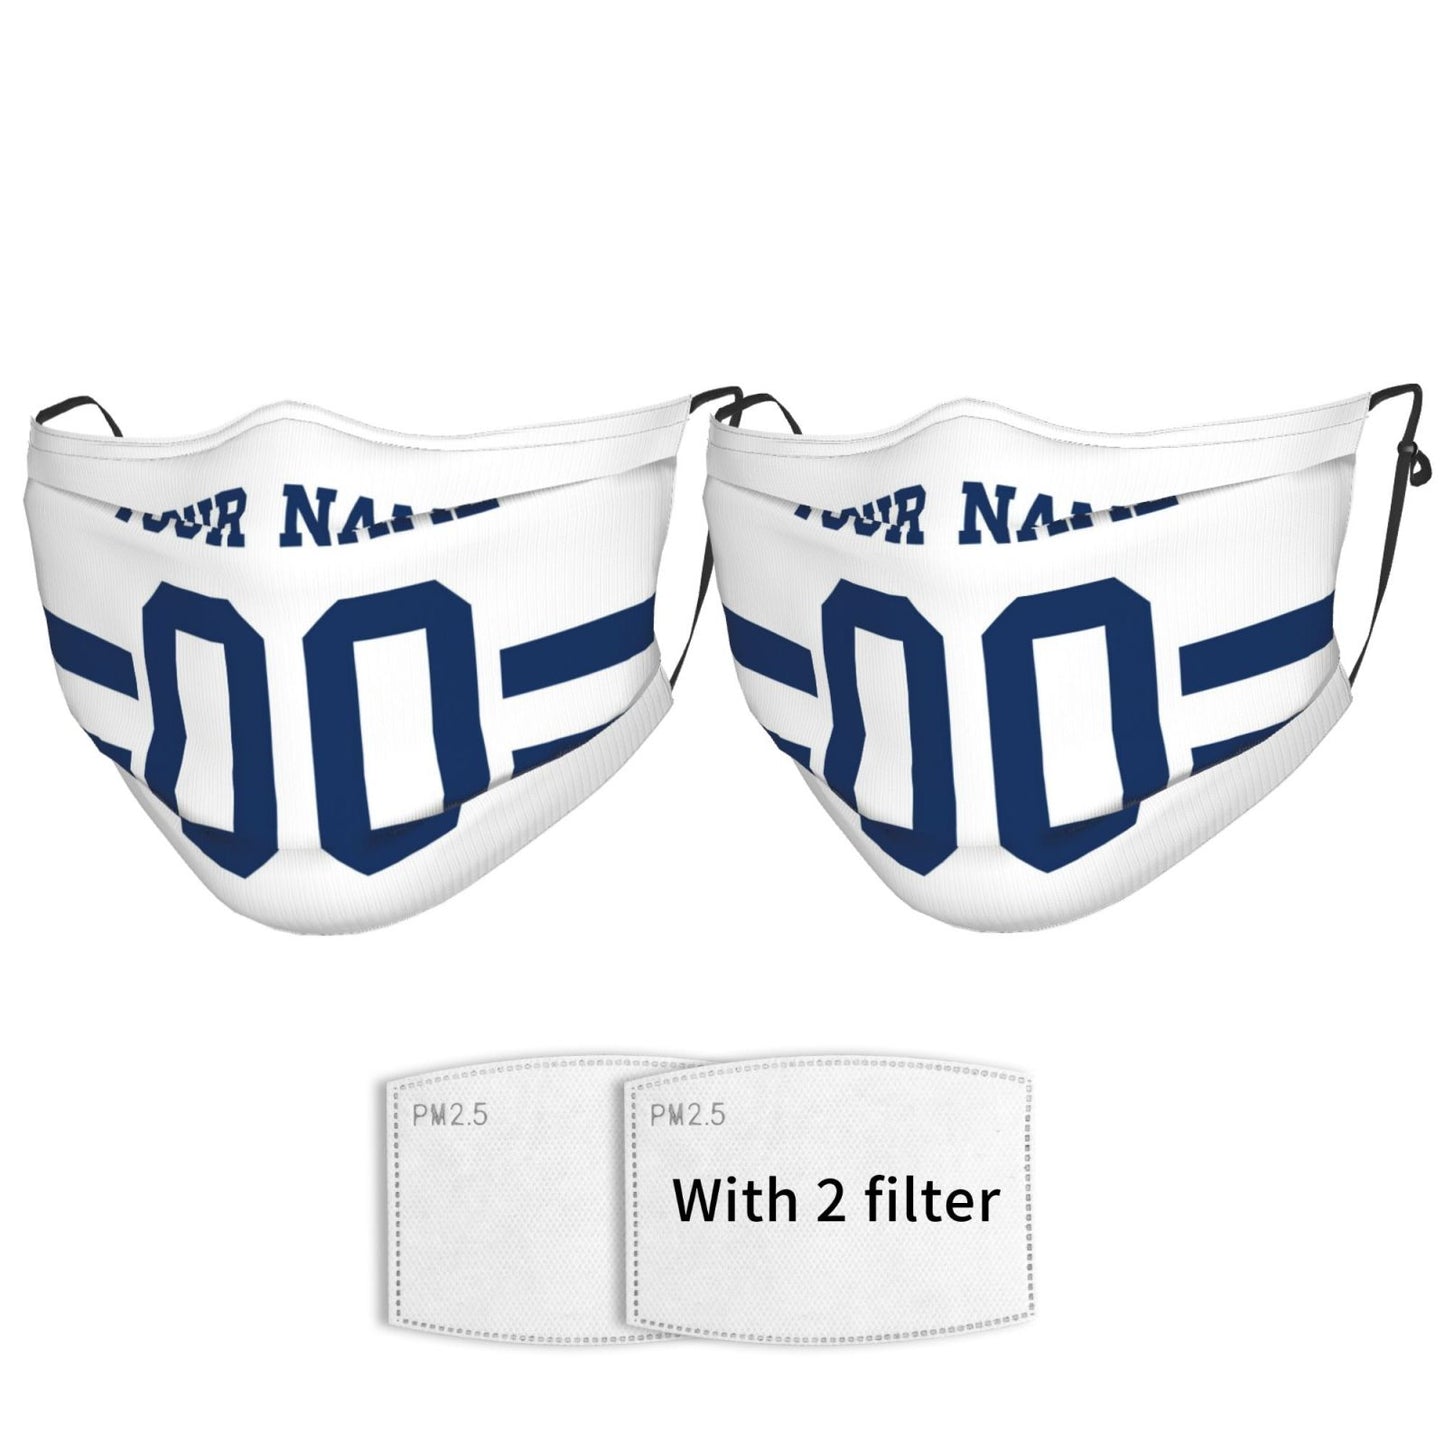 2-Pack Indianapolis Colts Face Covering Football Team Decorative Adult Face Mask With Filters PM 2.5 White